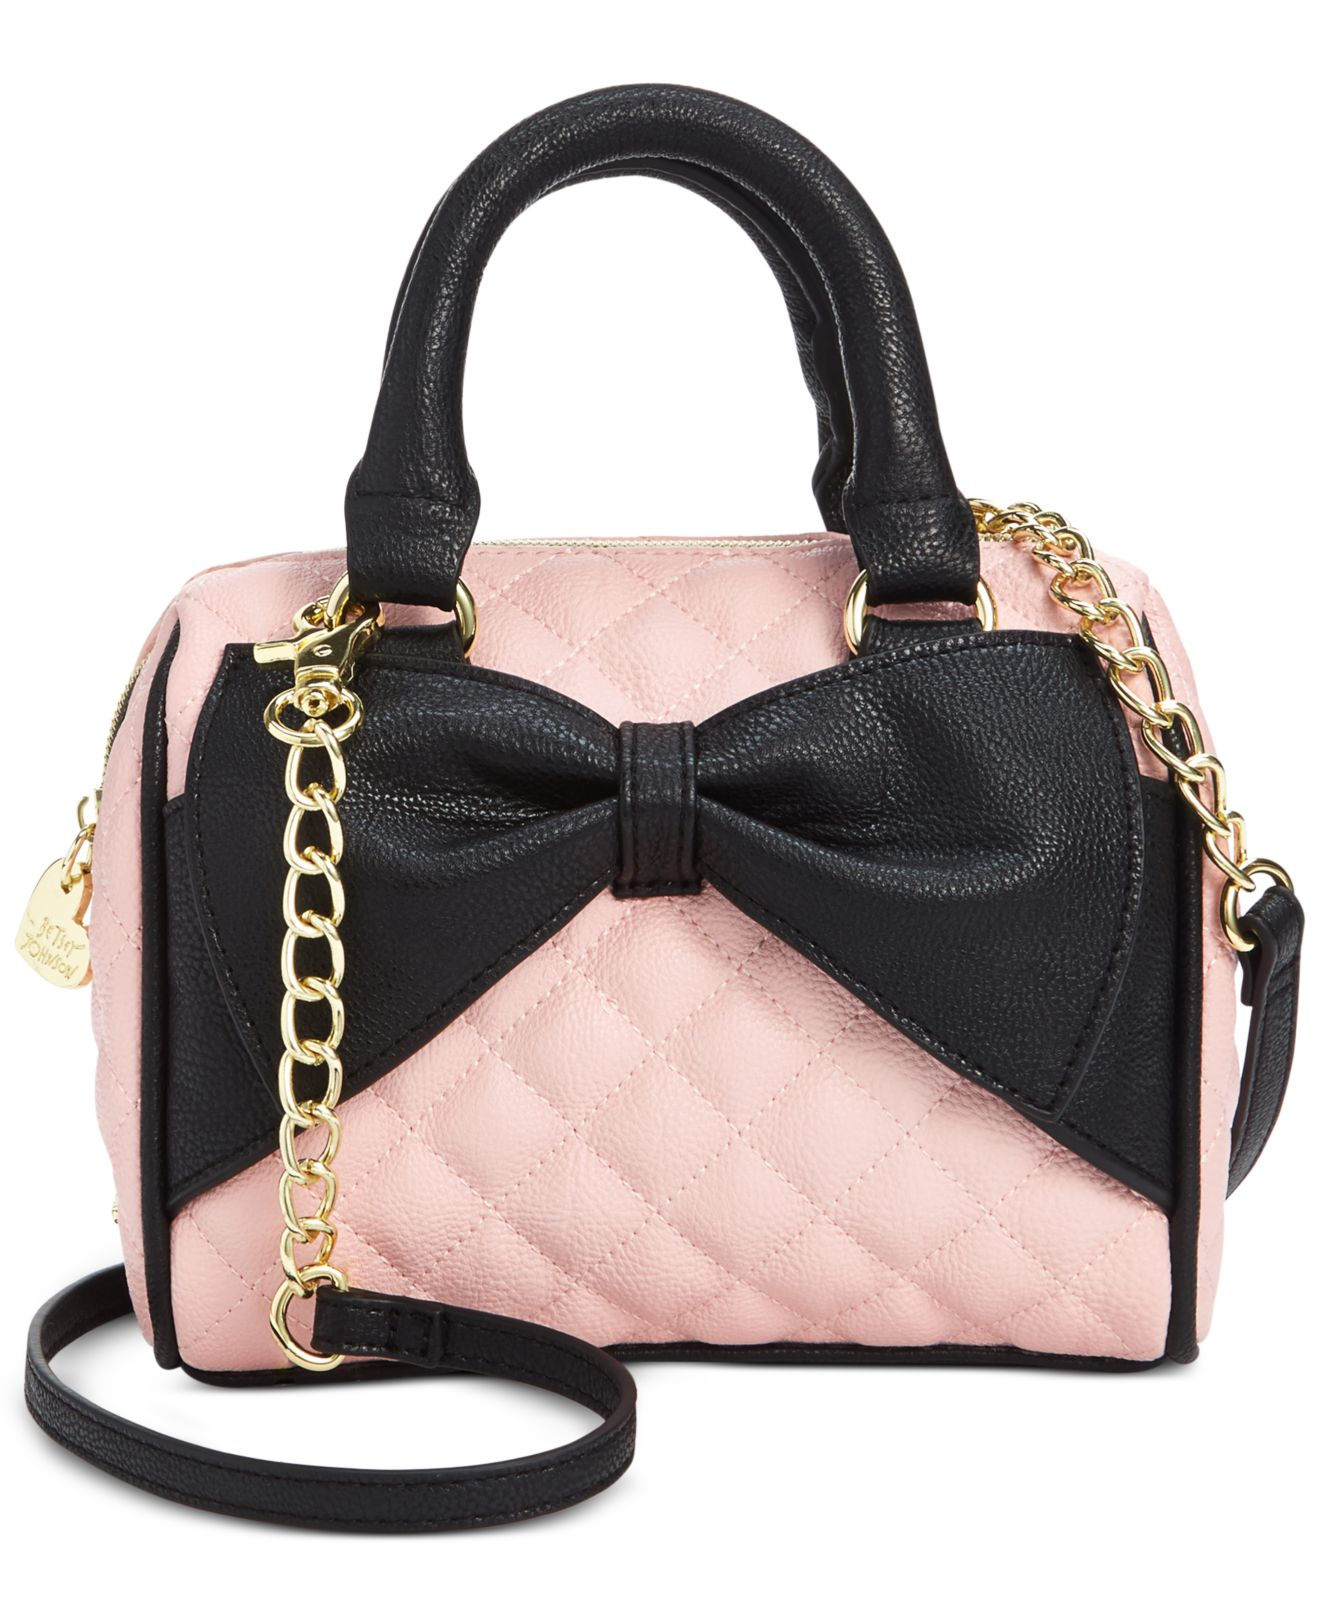 Lyst - Betsey Johnson Mini Bow Quilted Satchel in Pink